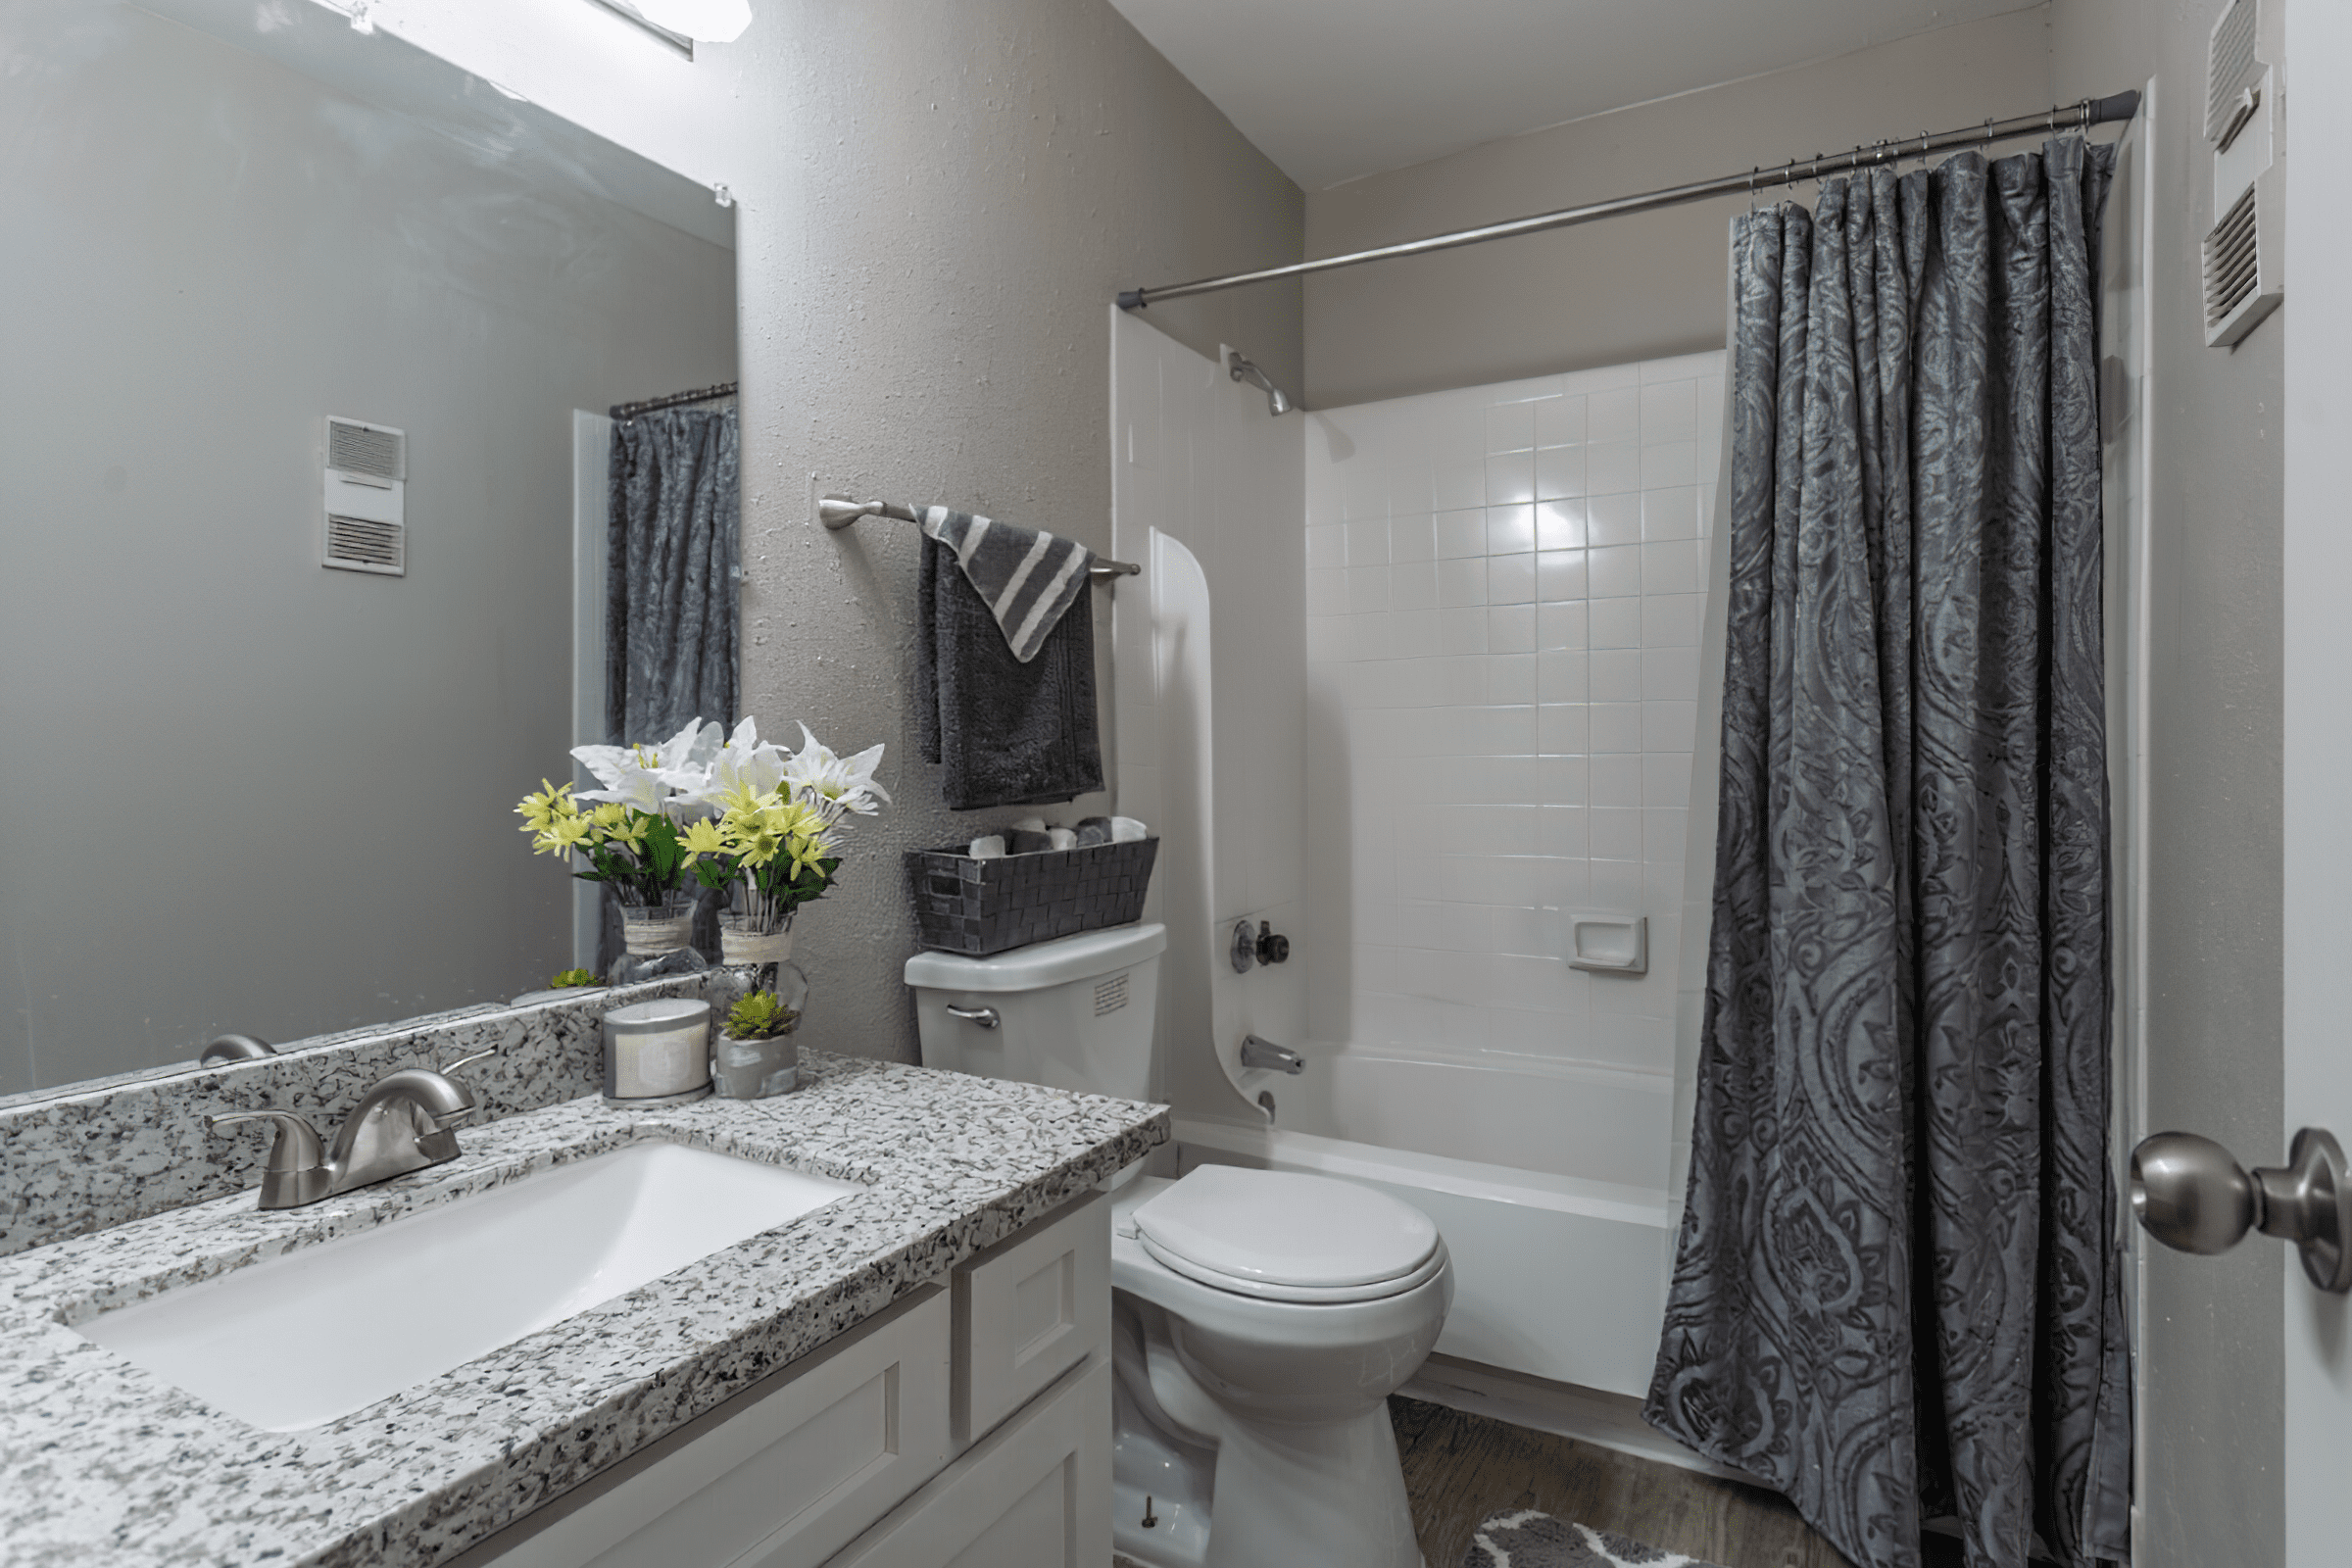 a room with a sink mirror and shower curtain